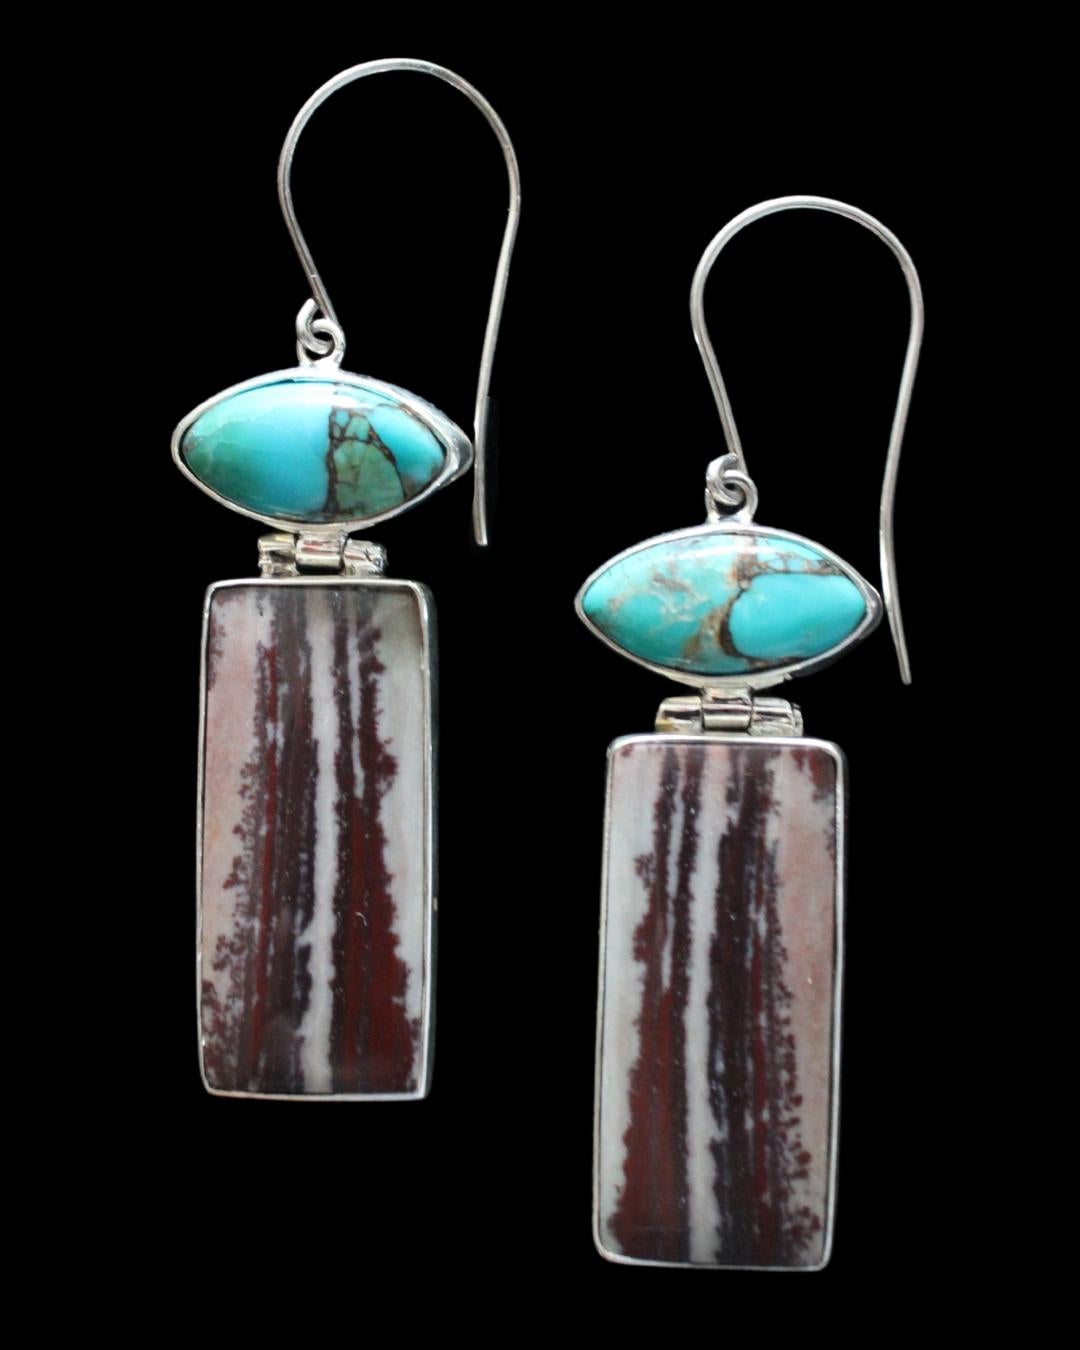 The sterling silver setting has a hinge that connects the marquis cut turquoise stone with the long, rectangular dendritic jasper cabochon. We collaborate with a master silversmith in Java, the heart of Indonesia's silver industry, to create this